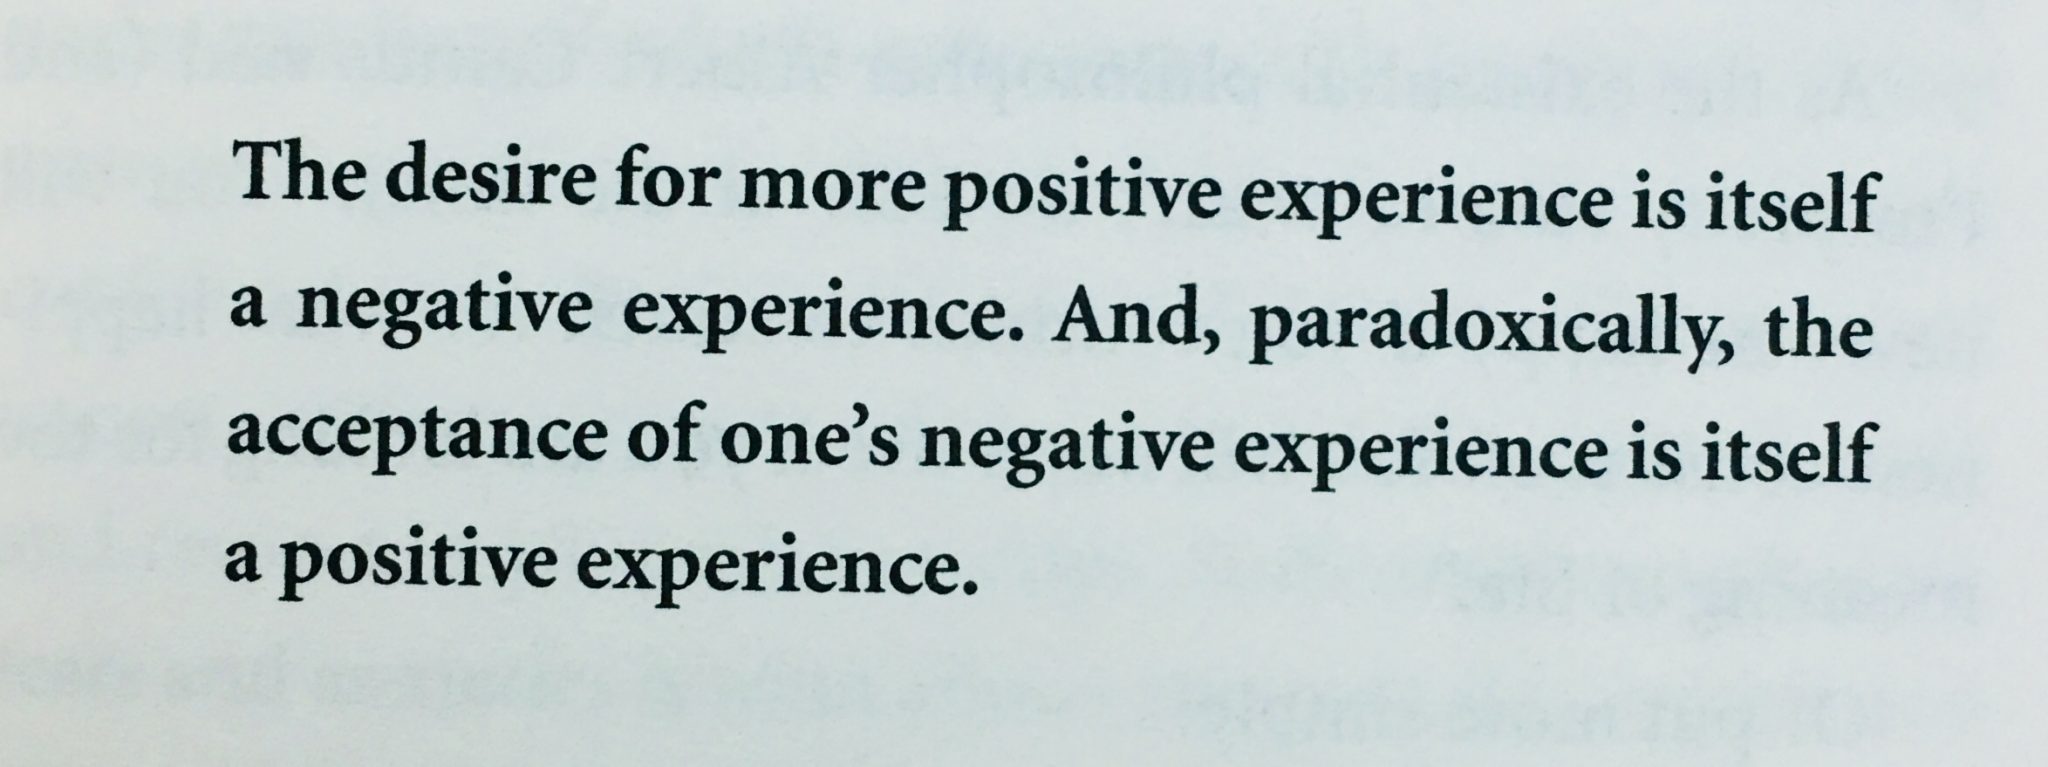 Lessen uit 'The Subtle Art of Not Giving a F*ck': "The desire for more positive experience is itself a negative experience. And, paradoxically, the acceptance of one's negative experience is itself a positive experience"